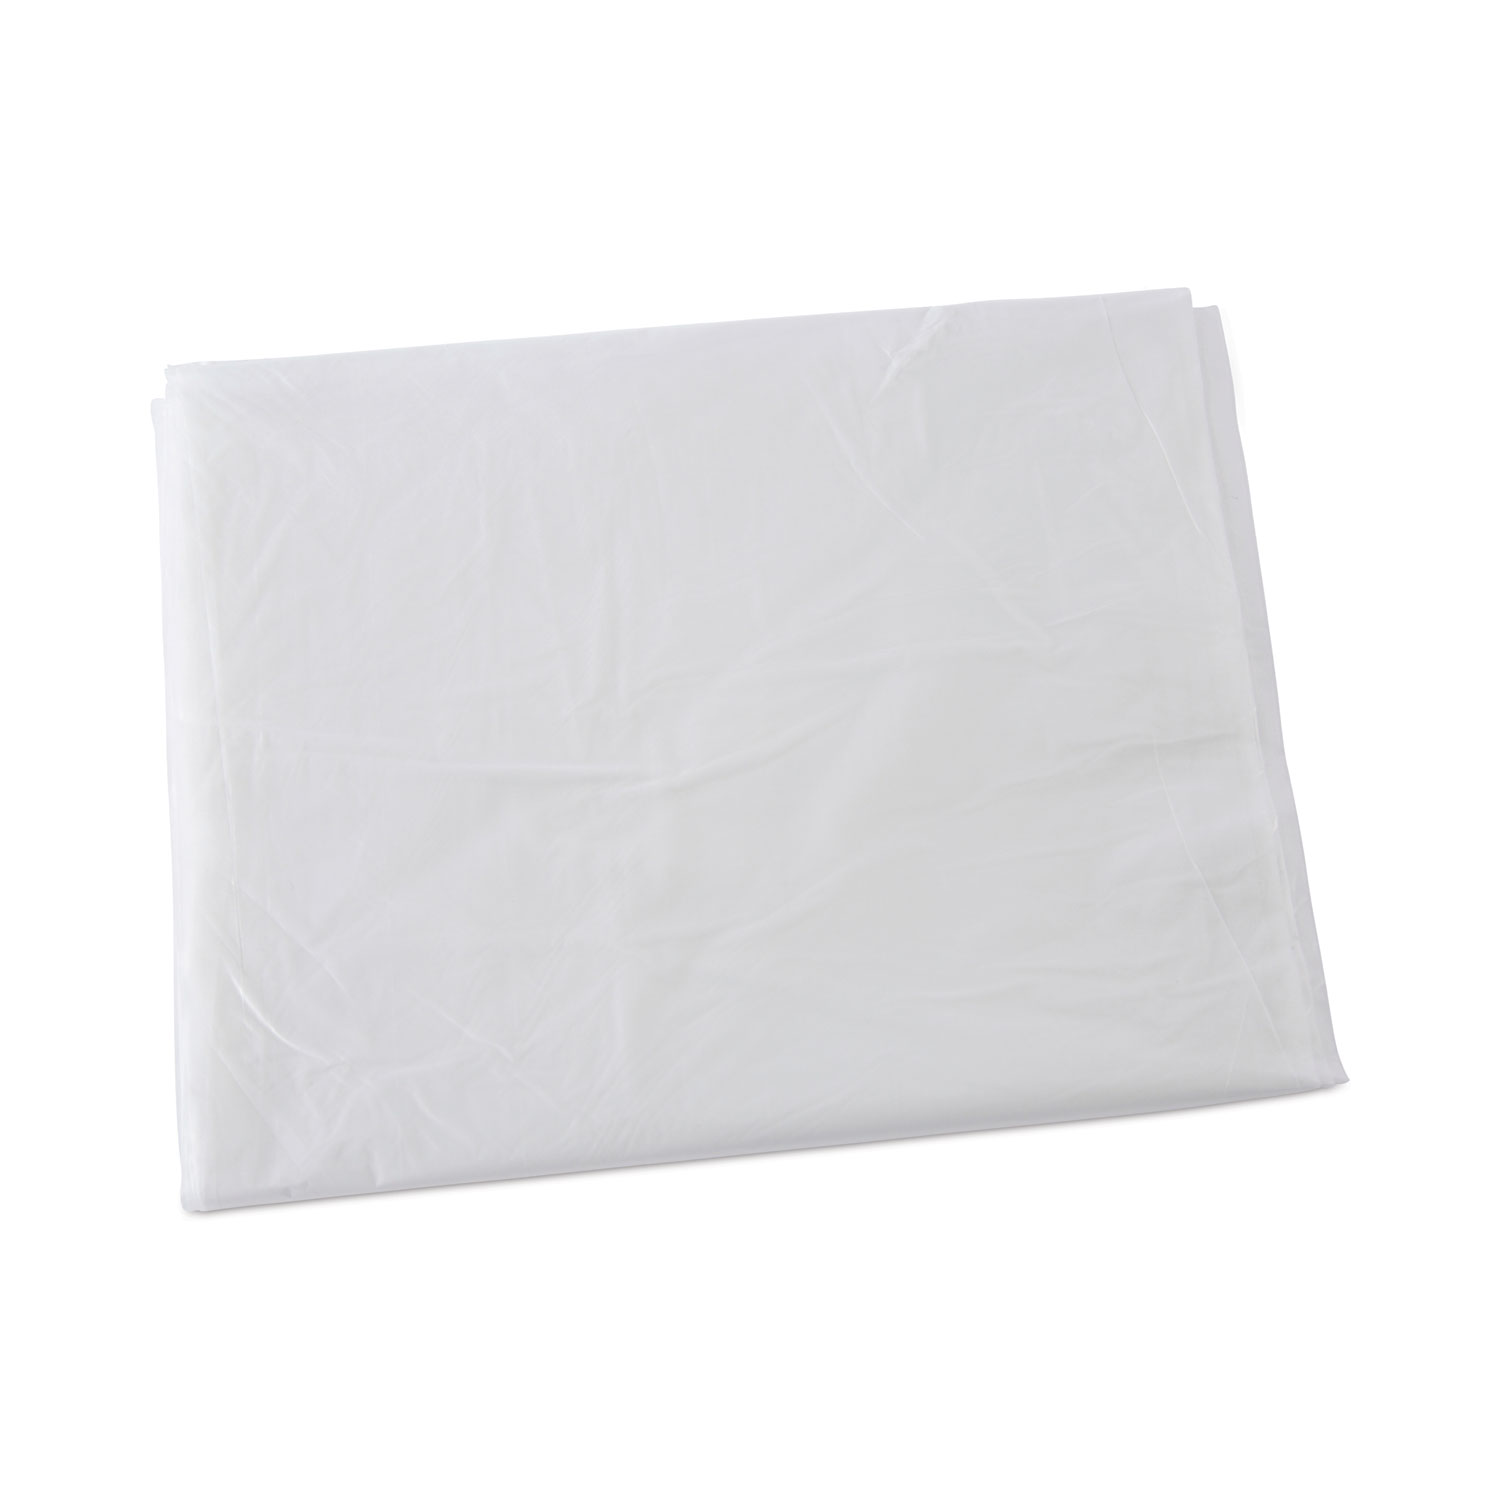 High Density Industrial Can Liners Flat Pack, 60 gal, 16 mic, 38 x 60, Natural, 100/Carton